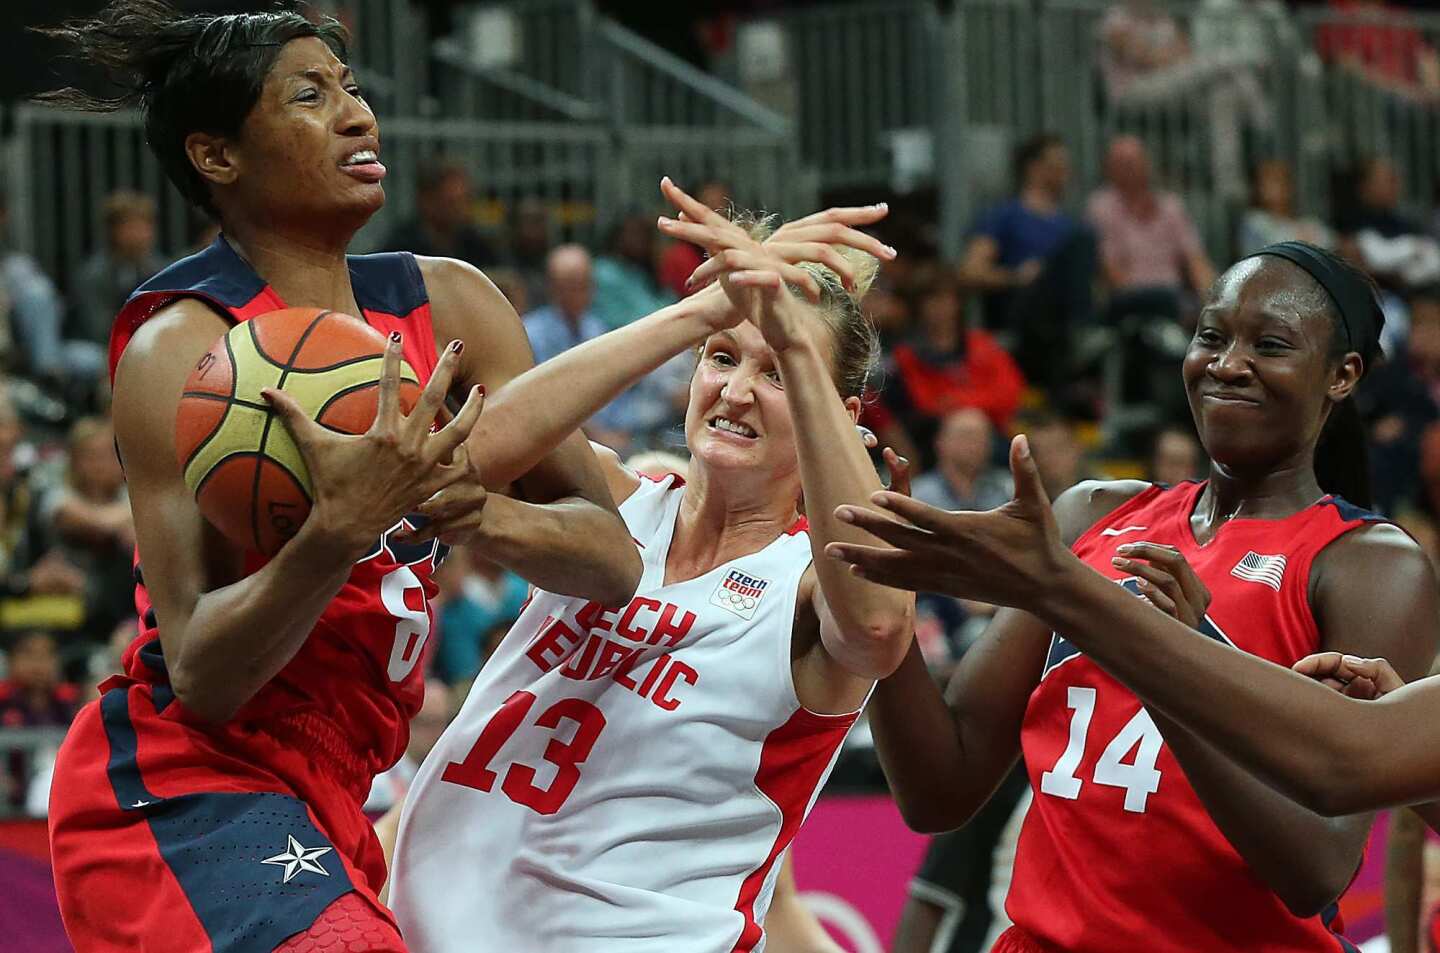 U.S. forward Angel McCoughtry rips the ball away from the Czech Republic's Petra Kulichova during a preliminary match, which the U.S. won 88-61.